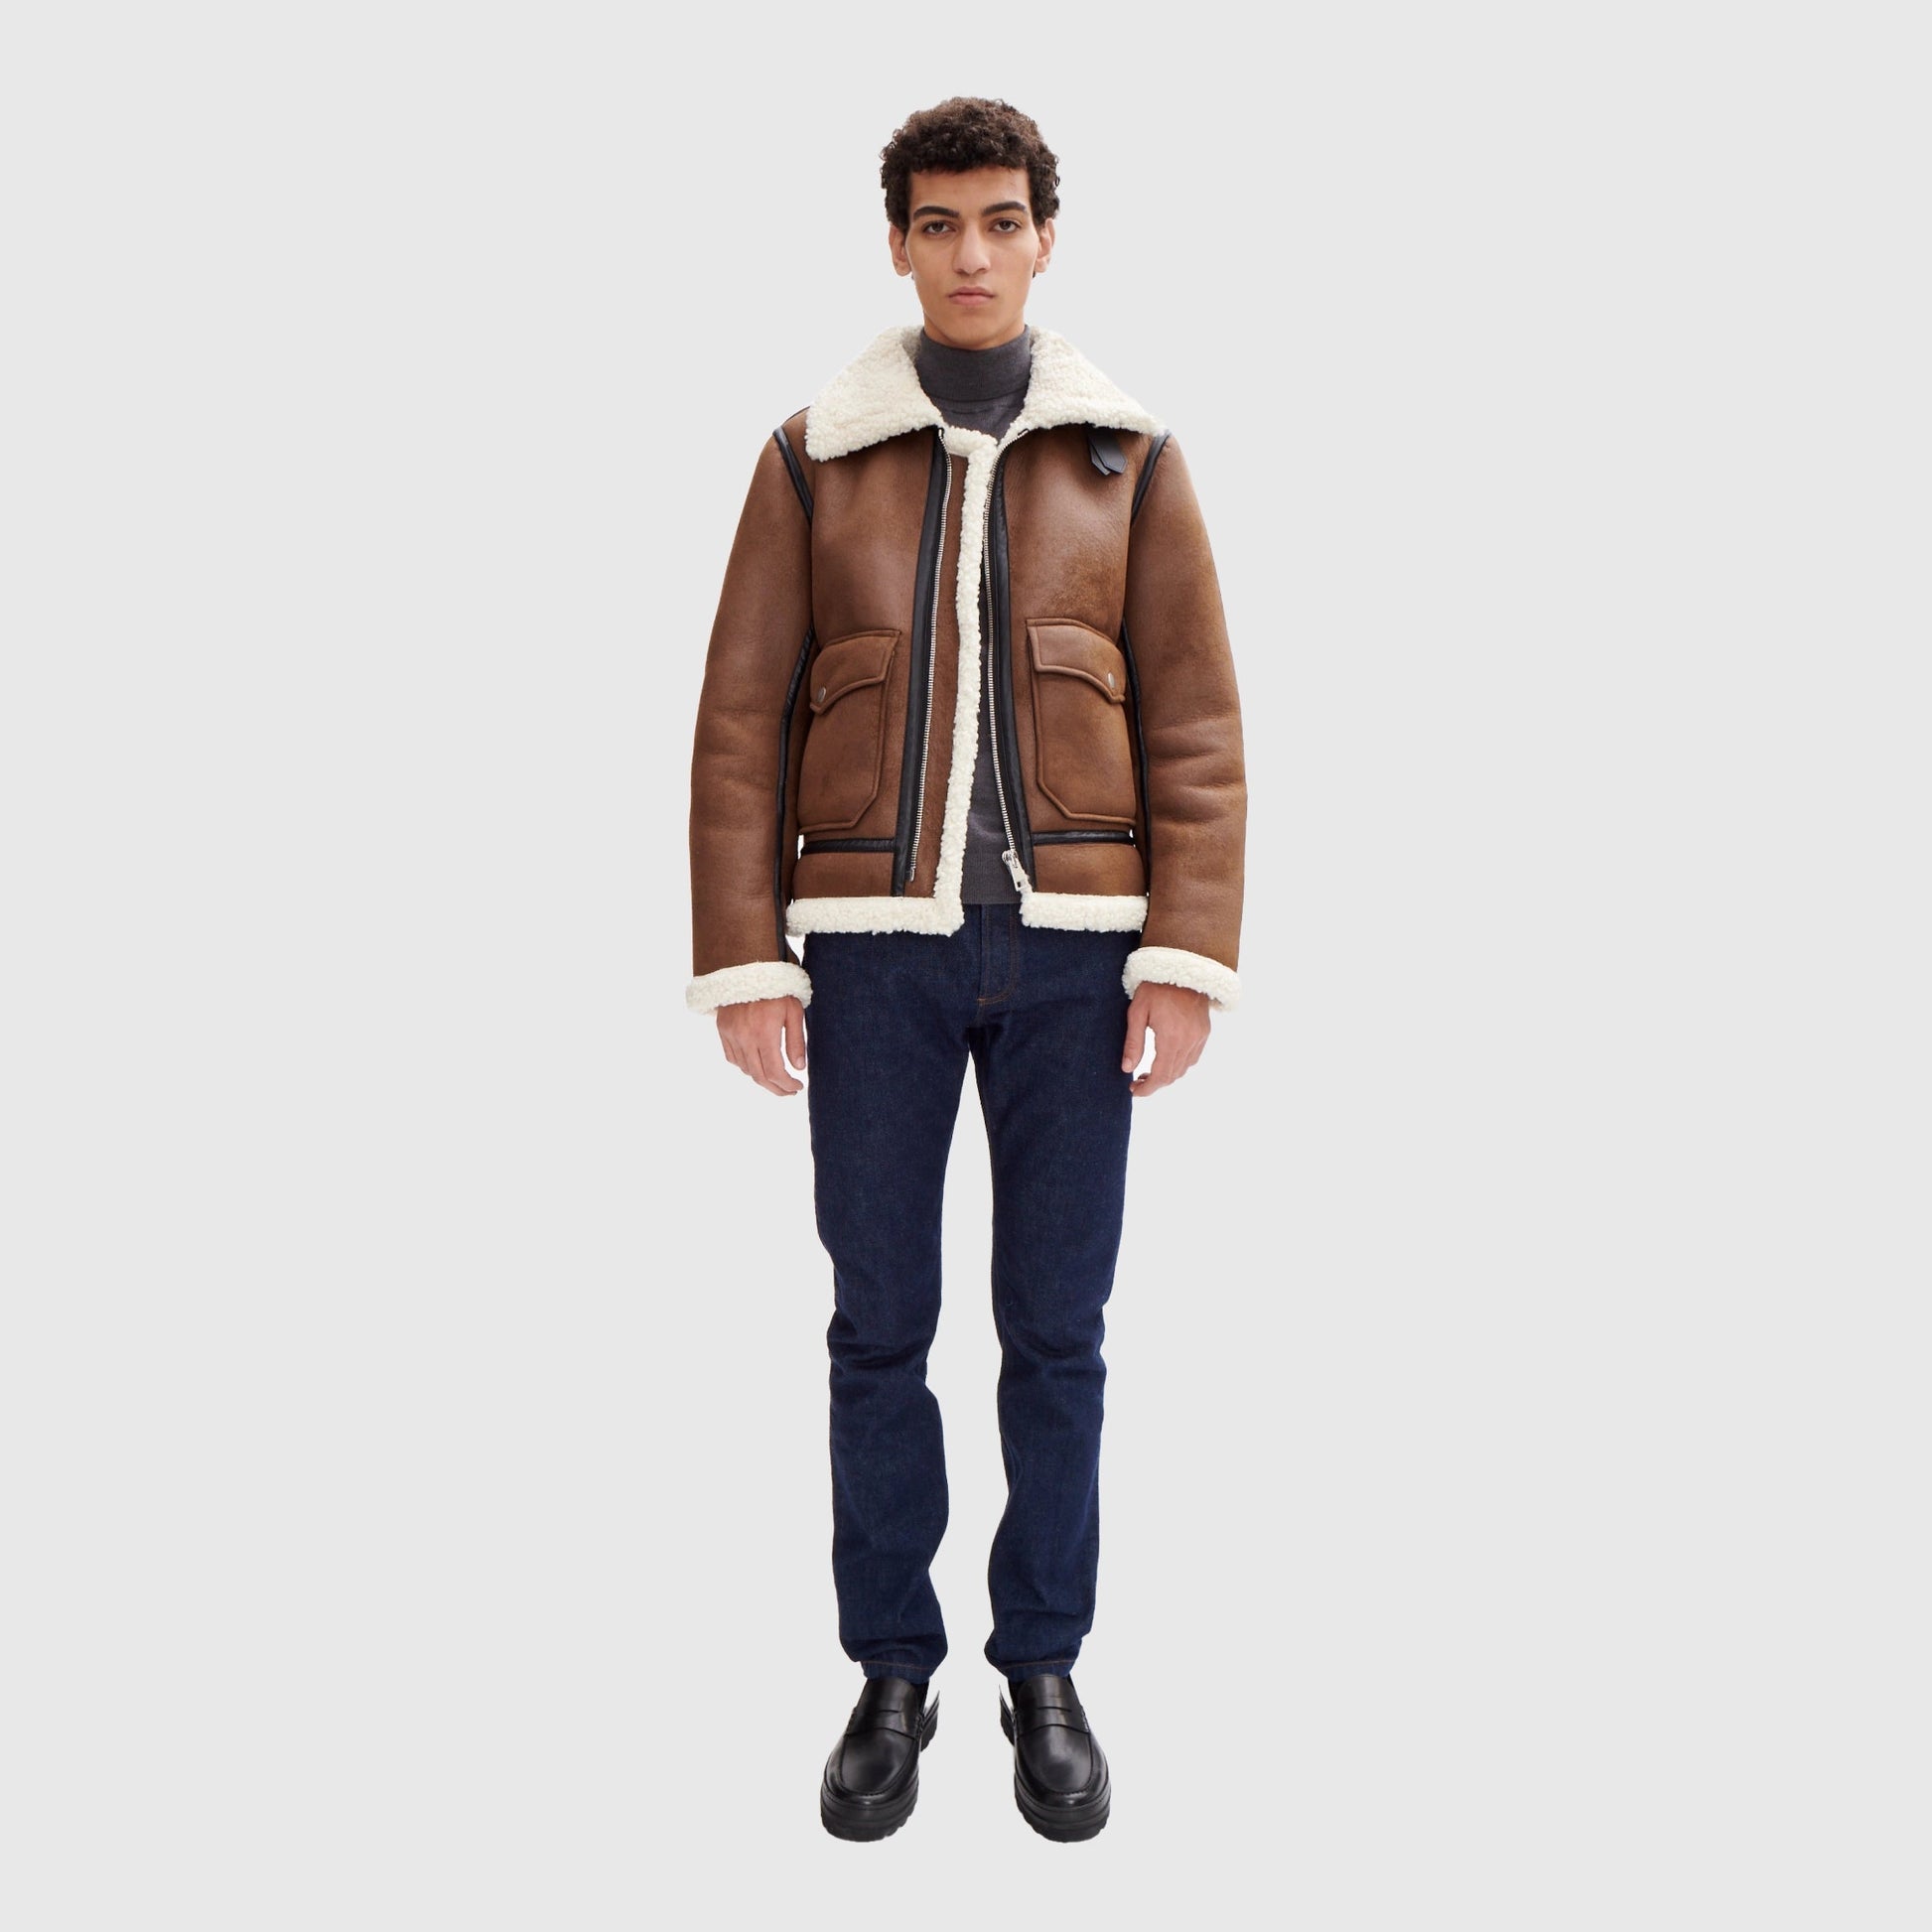 A.P.C. Tommy Jacket - Icy Brown Jacket A.P.C. 